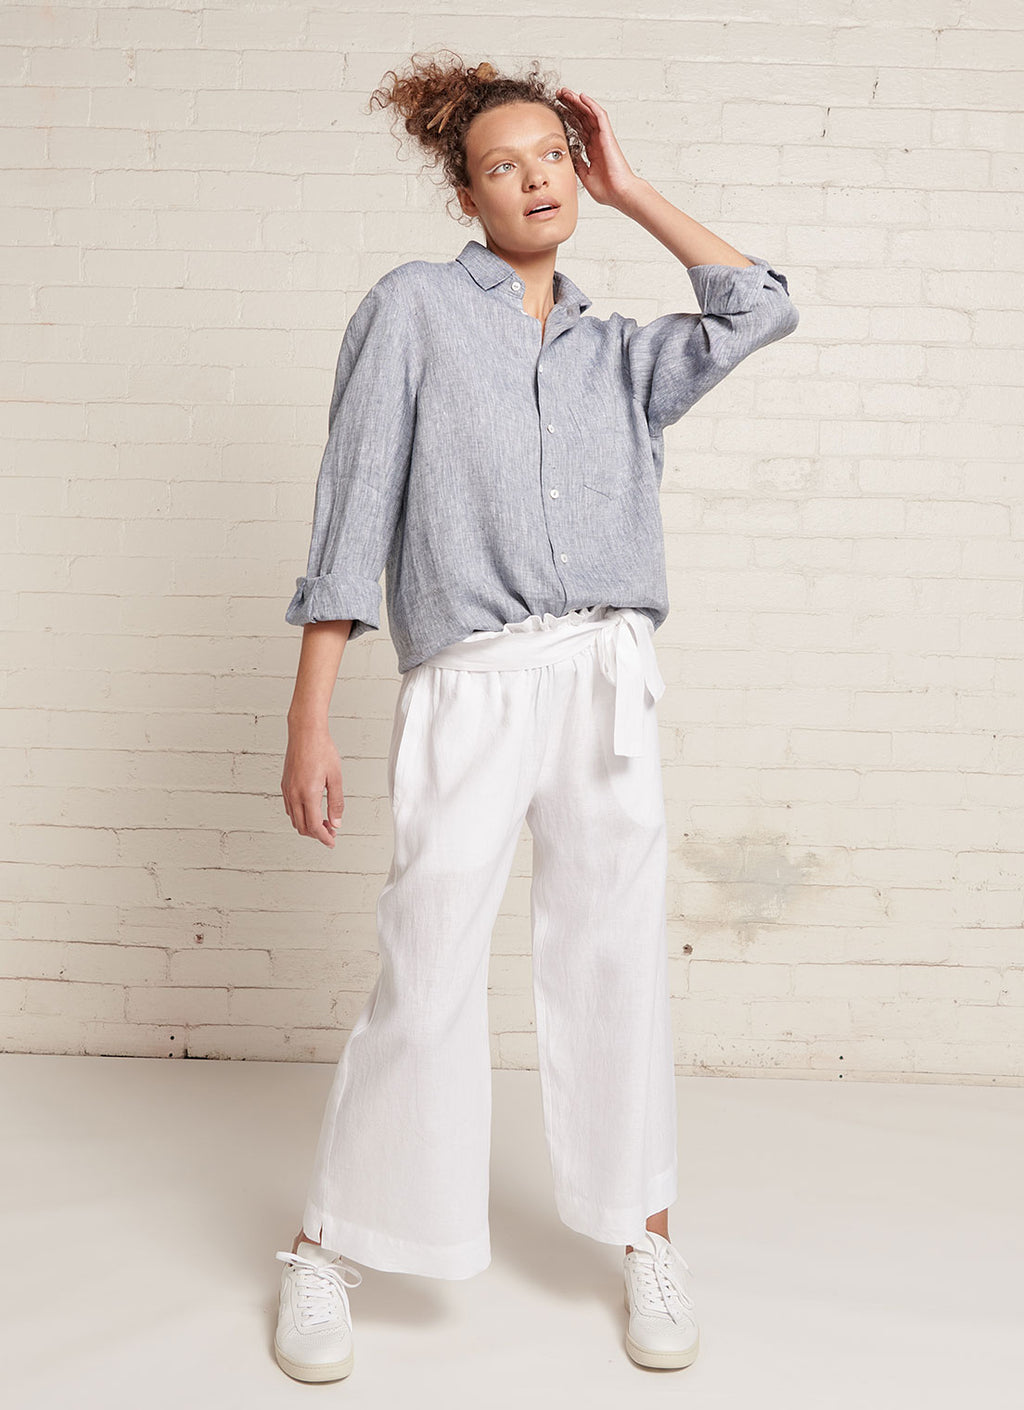 A white, loose fitting crop pants with elasticated waistband and tie belt of the same fabric made from yarn dye washed linen